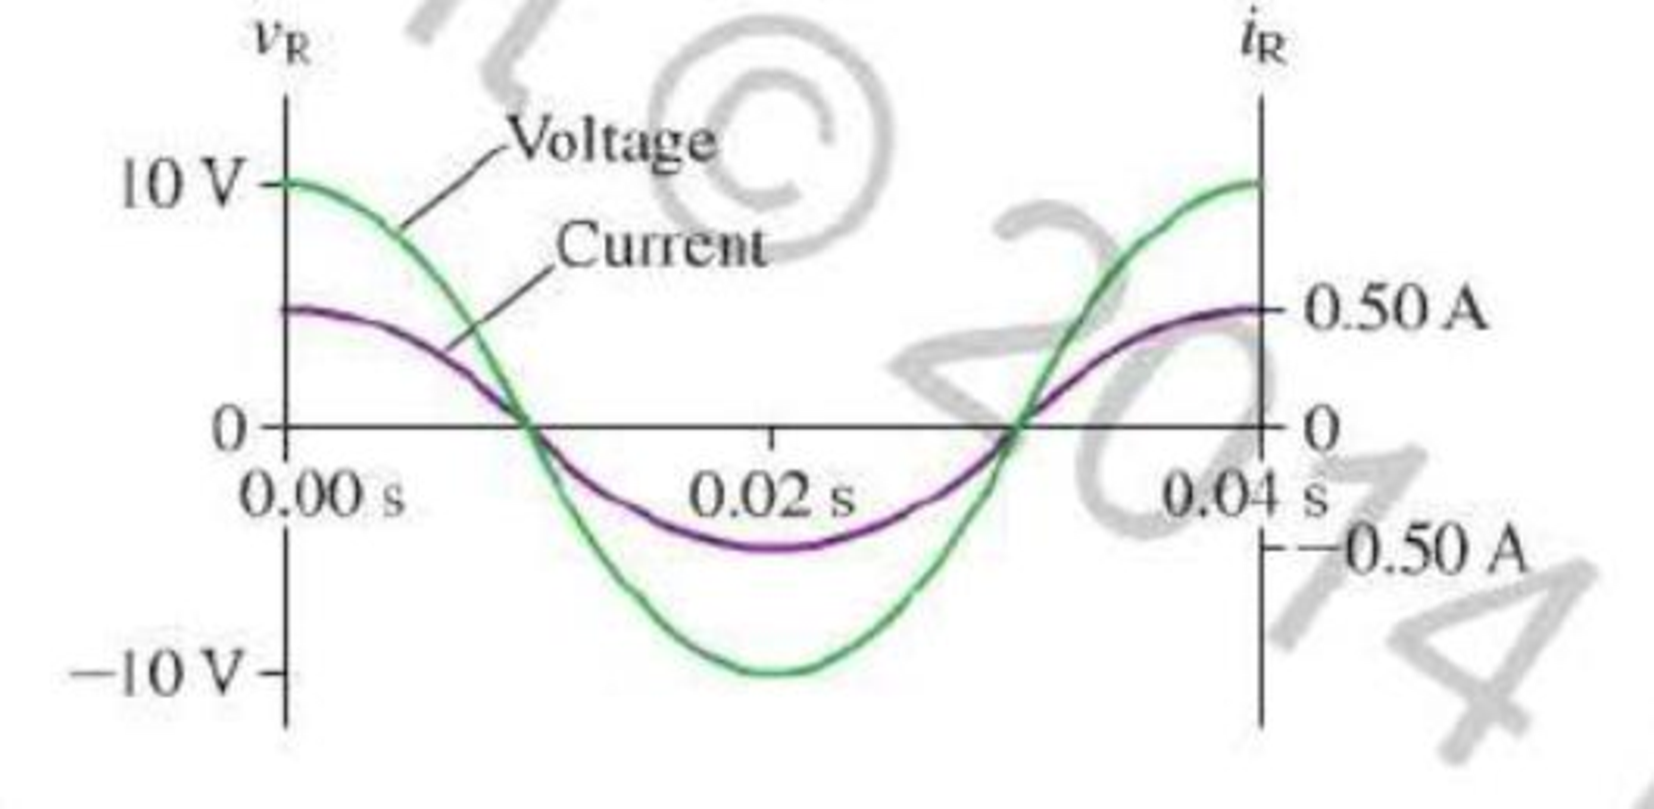 Chapter 26, Problem 2P, Figure P26.2 shows voltage and current graphs for a resistor. a. What is the value of the resistance 